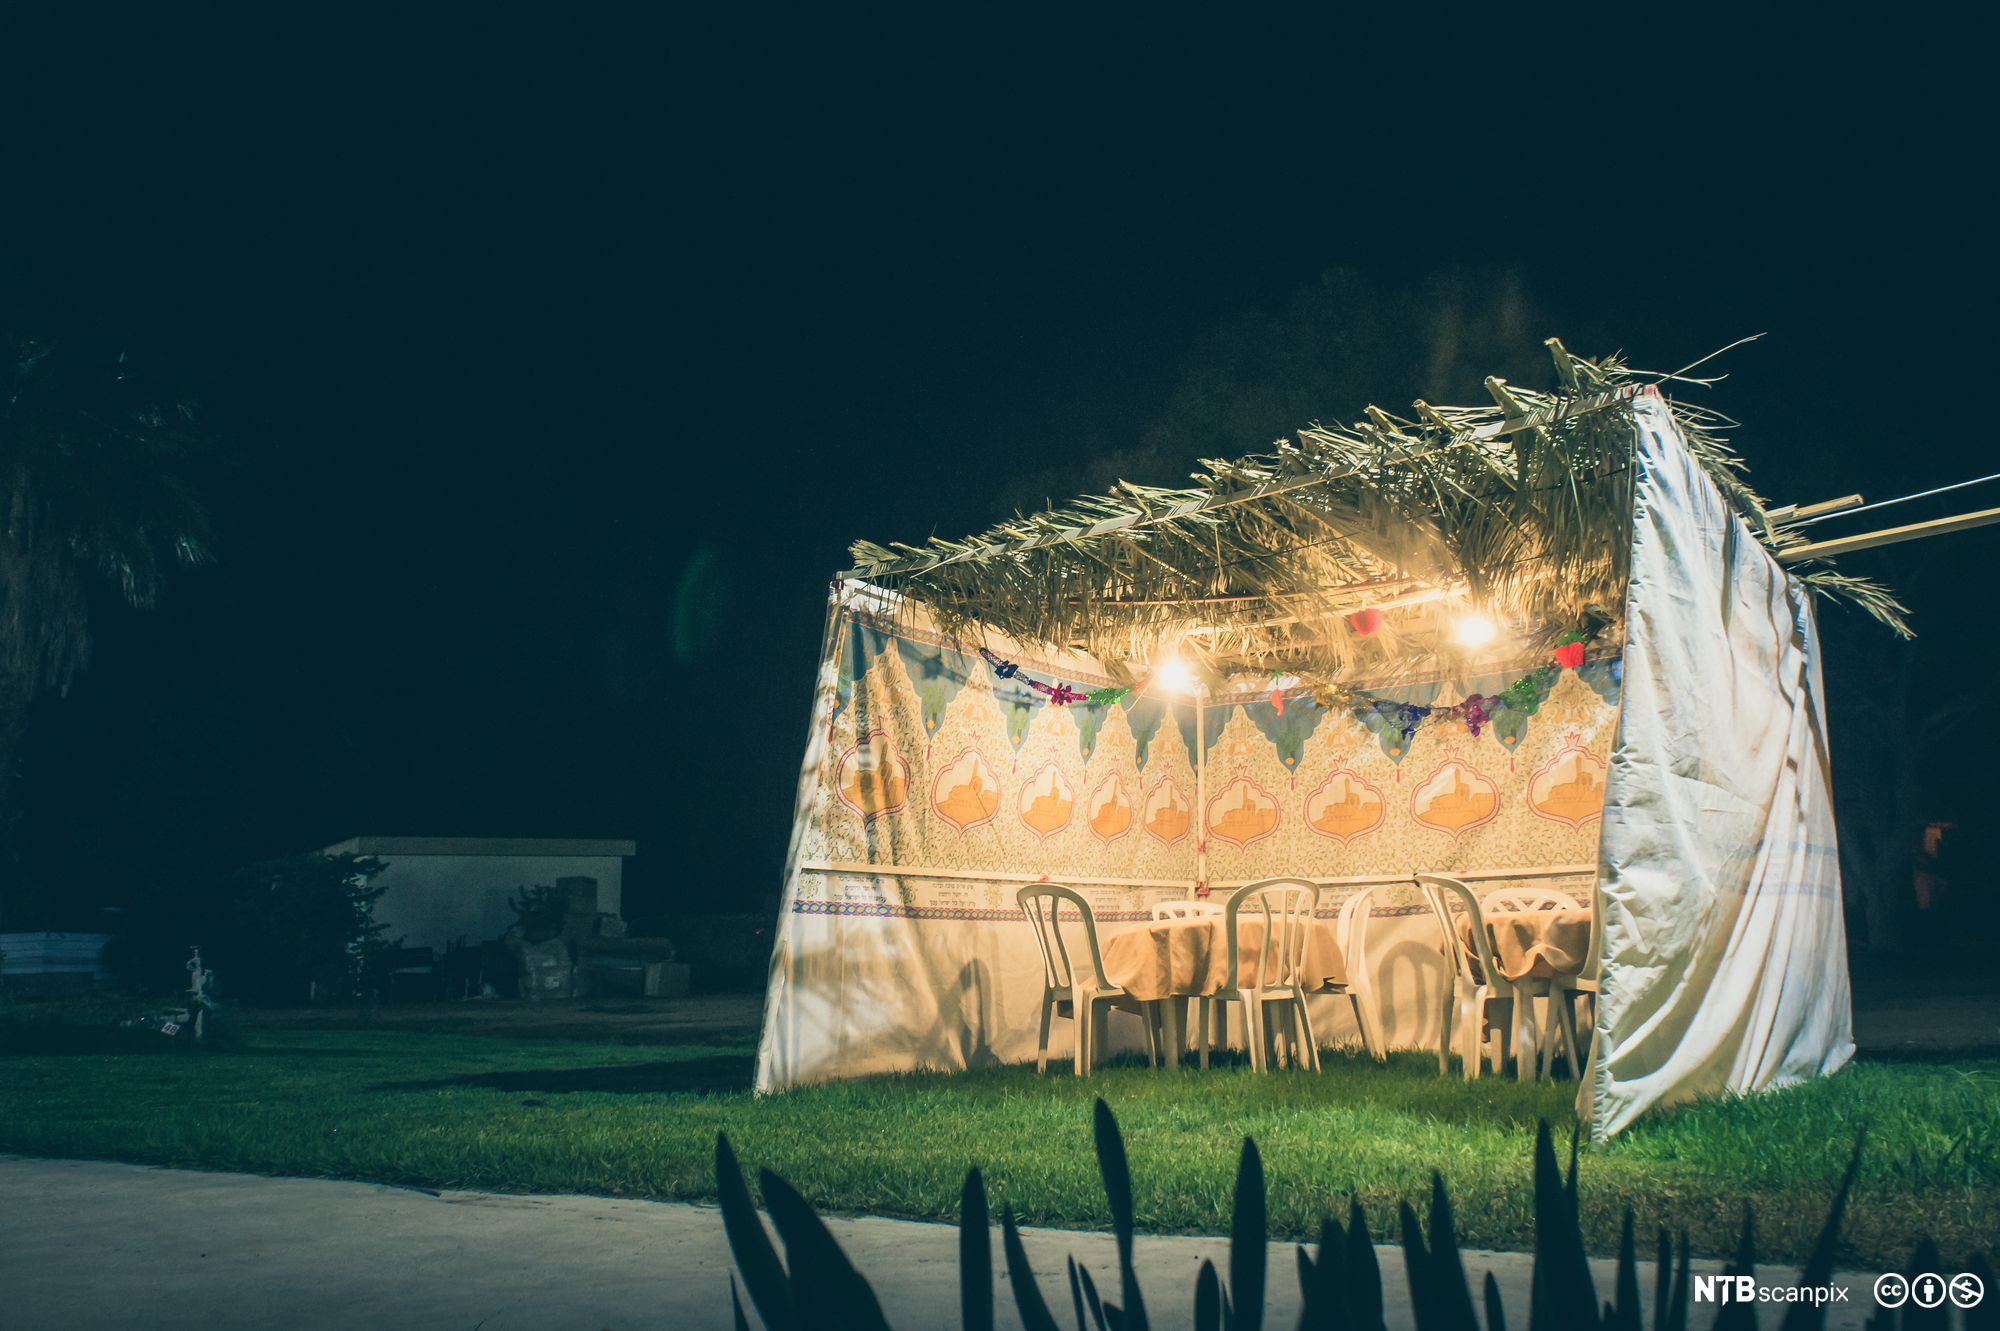 ID: a Sukkot, built up for the festival of Sukkot, the third in a series of festivals in the Jewish High Holy Days, after Yom Kippur and Rosh Hashannah and before Simchat Torah.